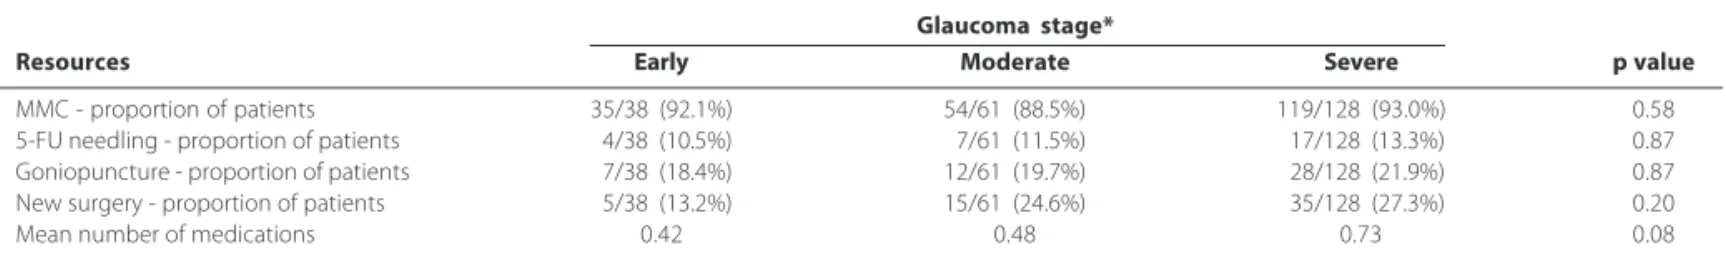 Figure 1. Percentage of 5-FU injections, goniopuncture and new surgery according to glaucoma stage.